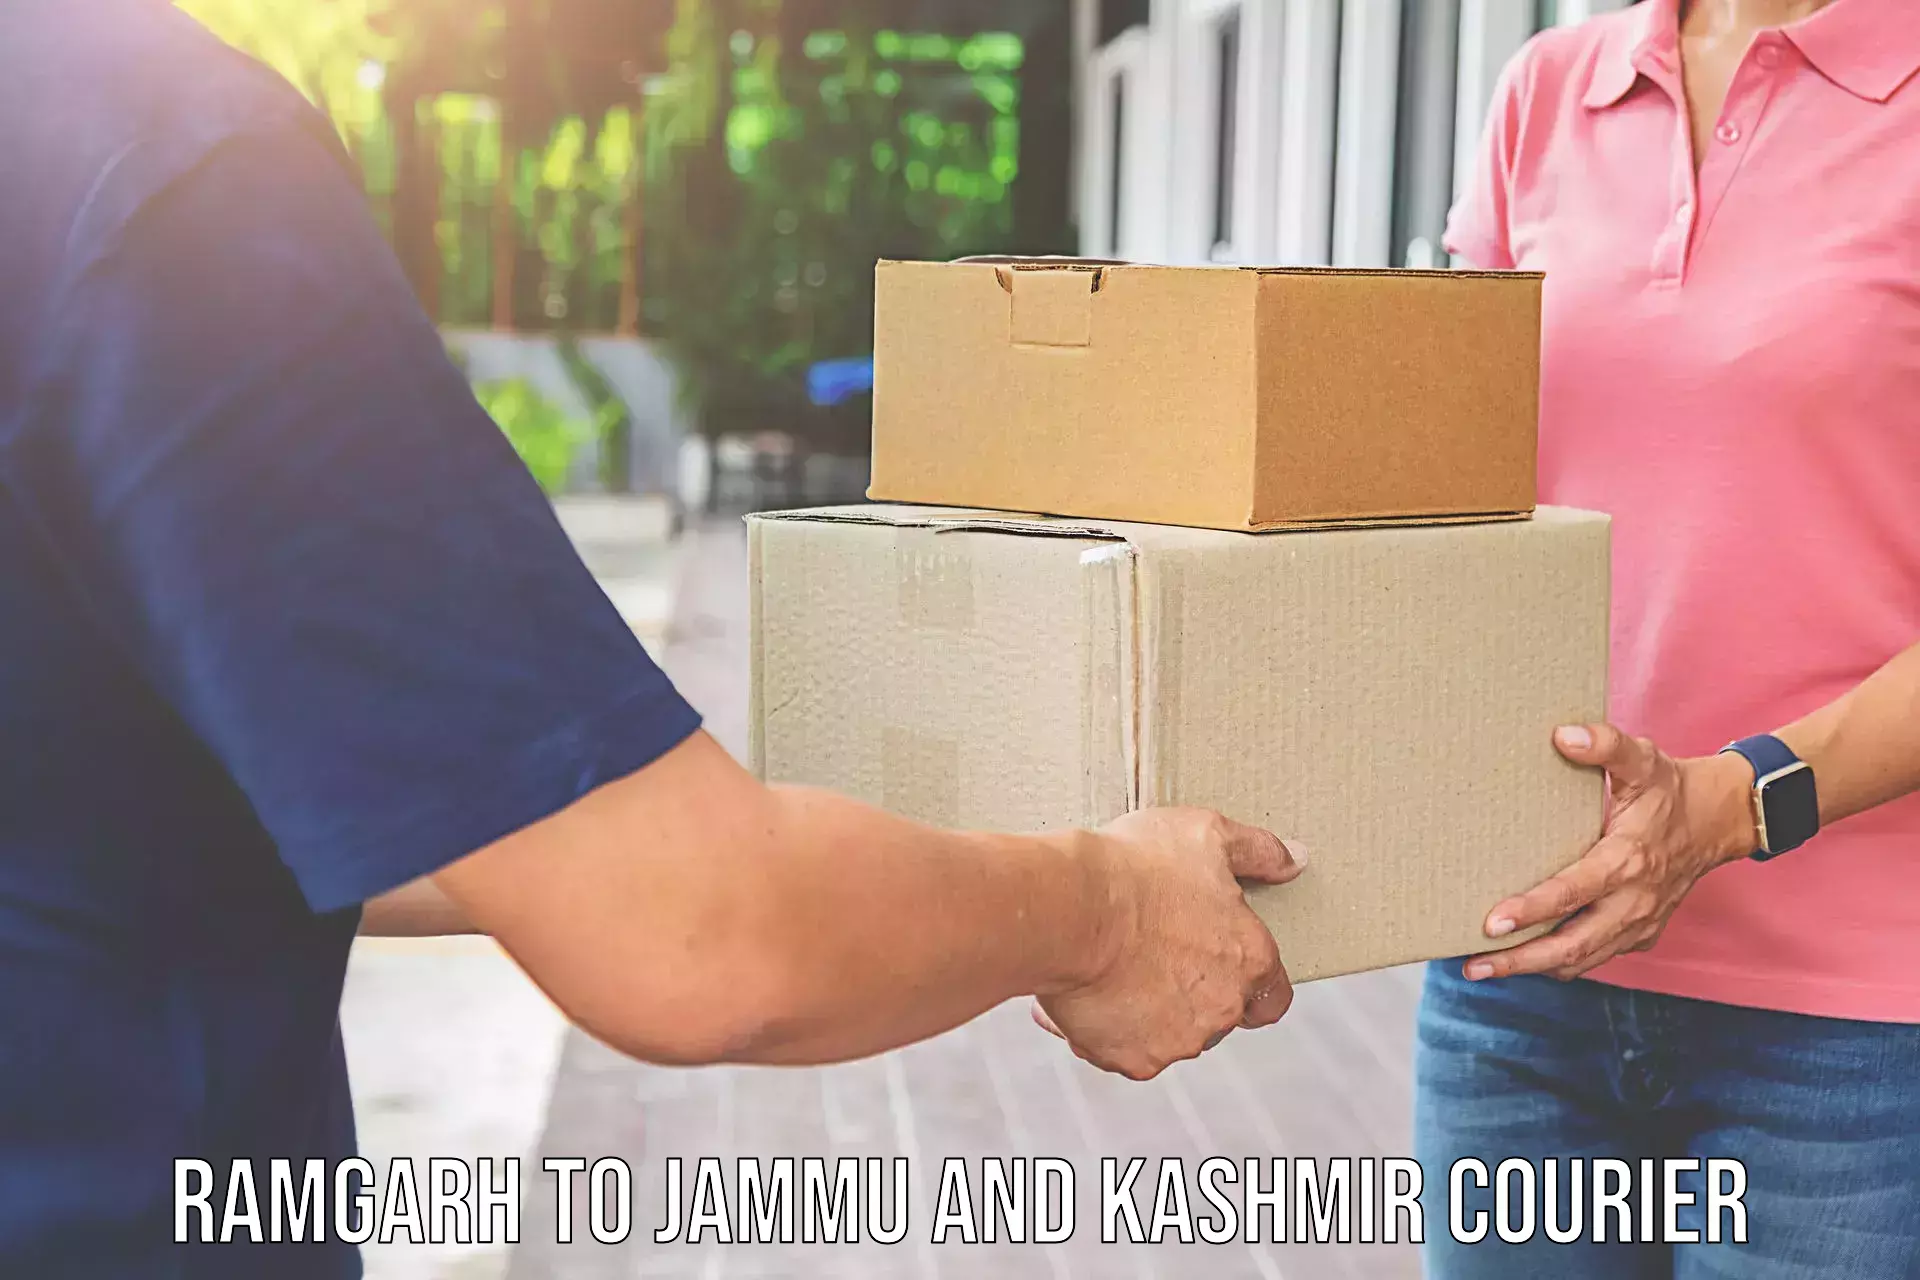 Furniture transport specialists Ramgarh to Baramulla